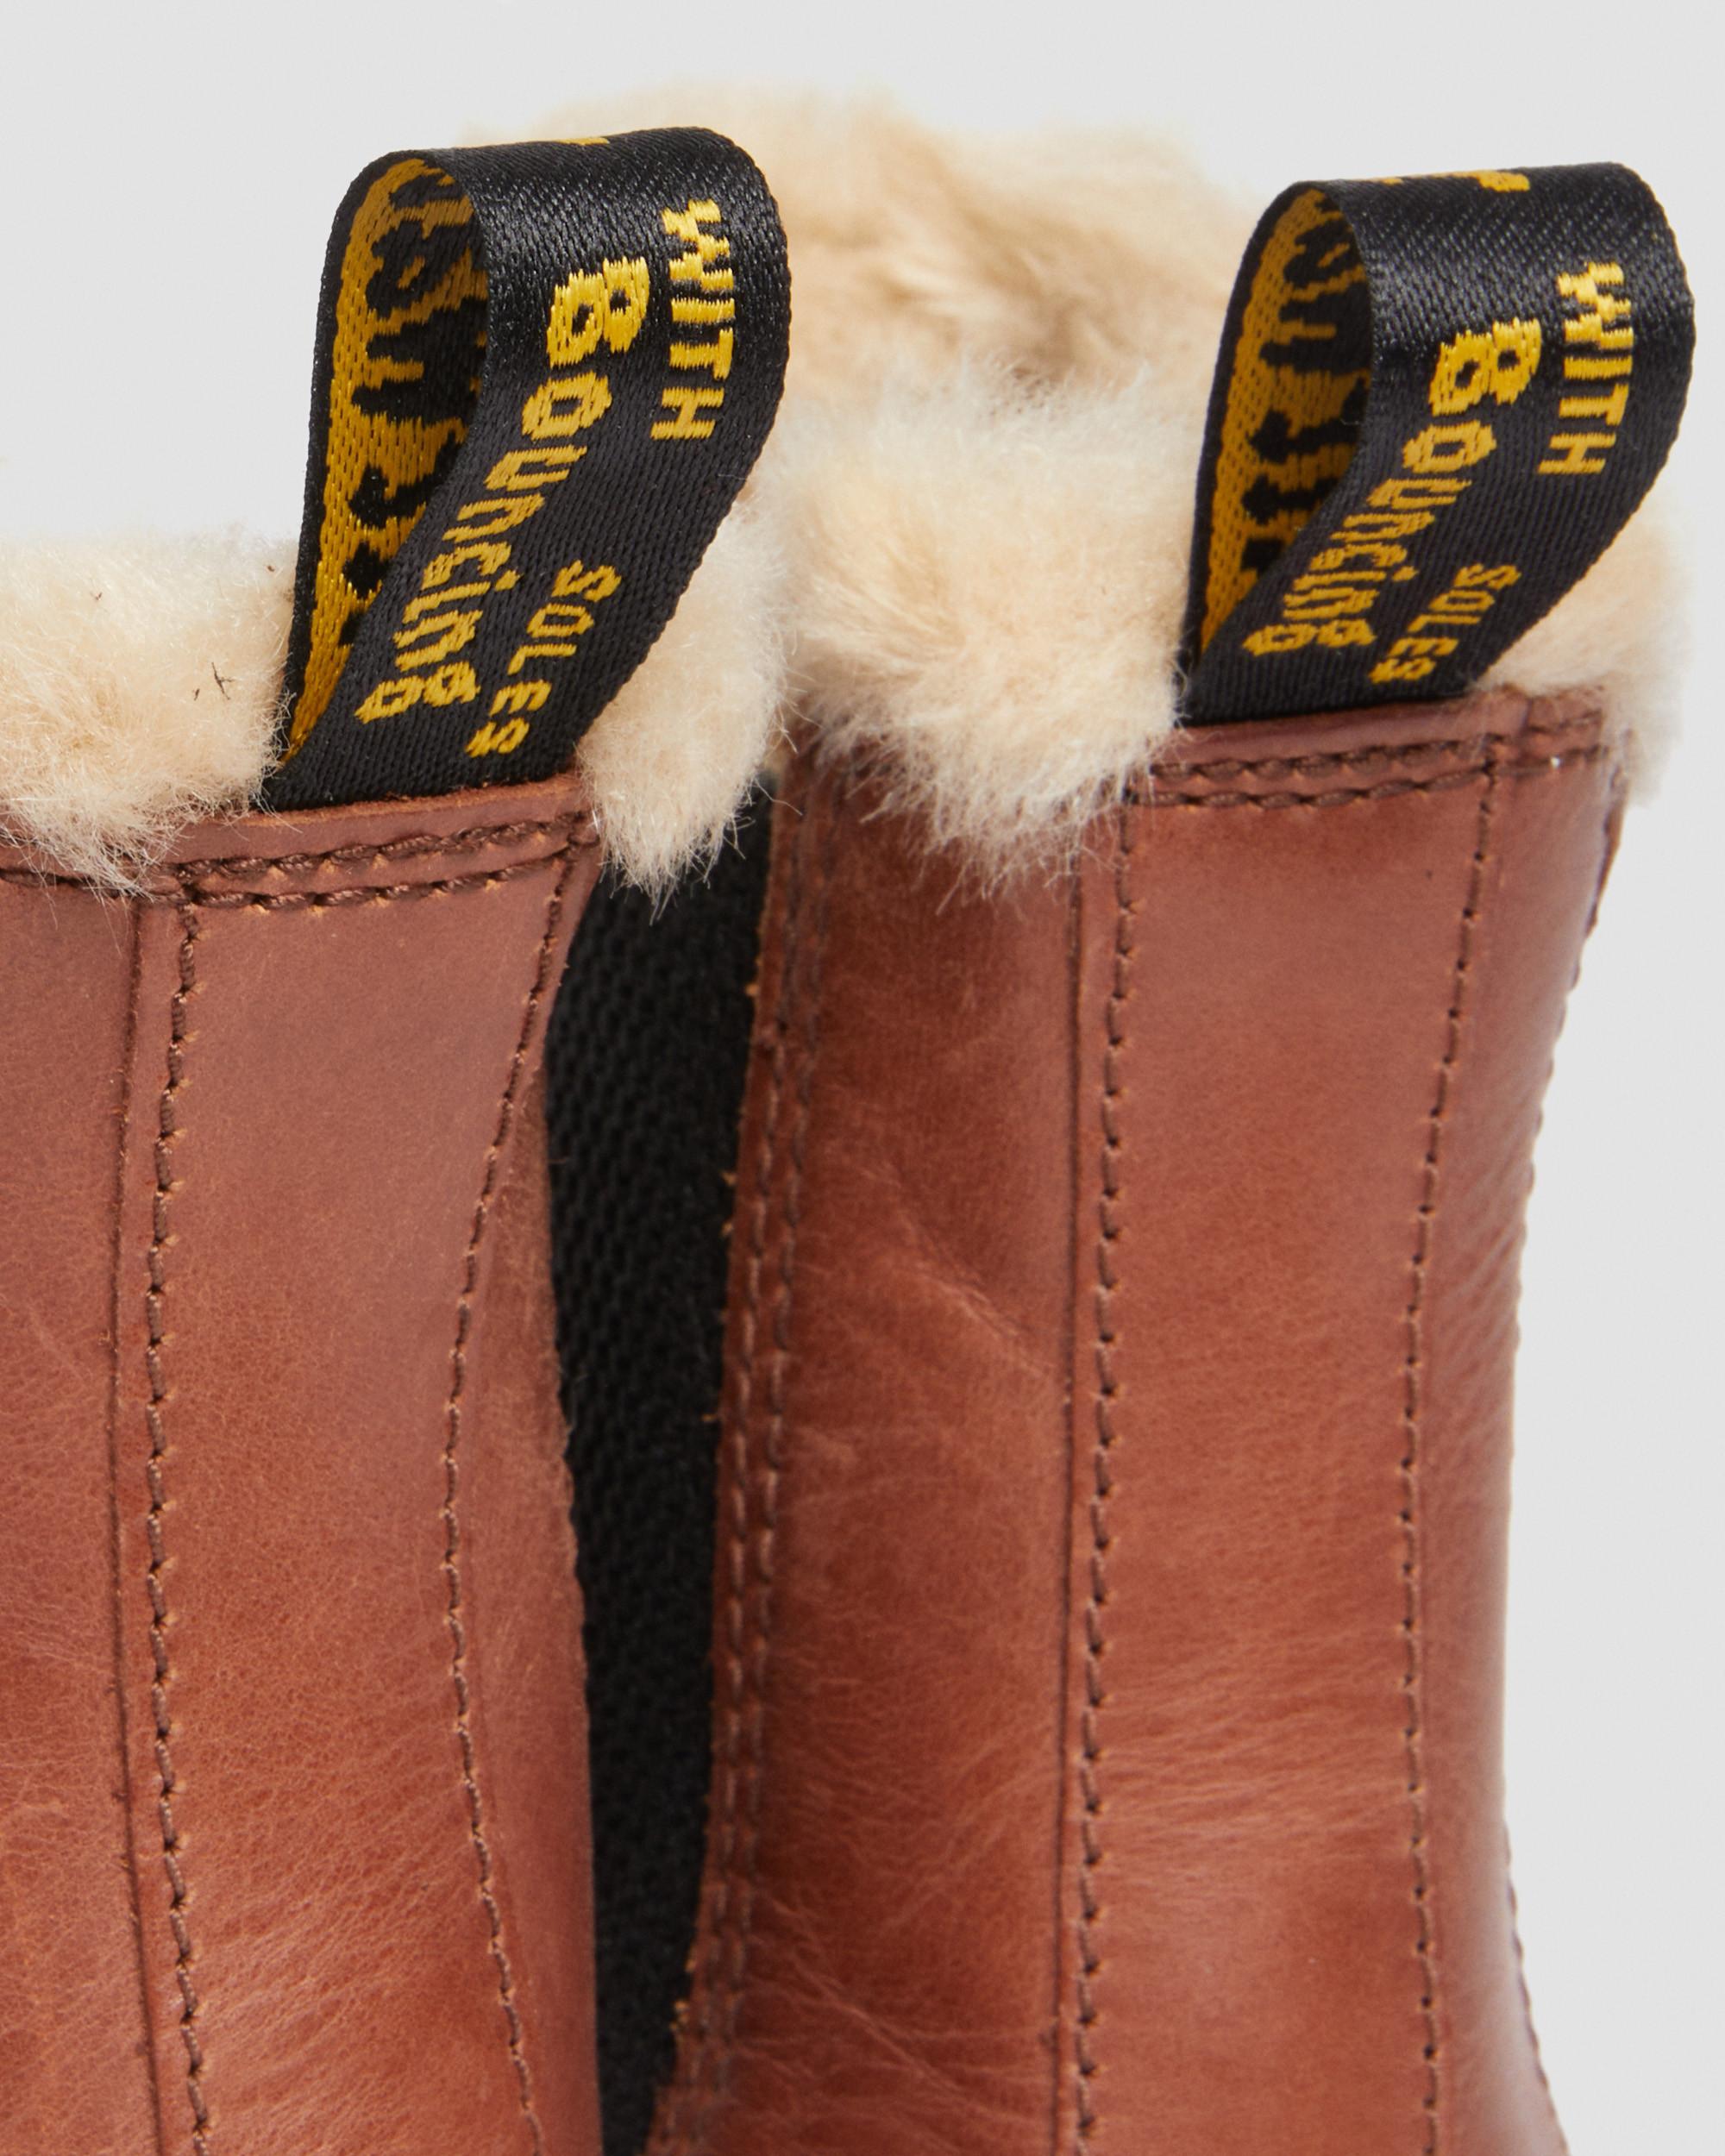 2976 Leonore Faux Fur-Lined Chelsea Boots in Tan